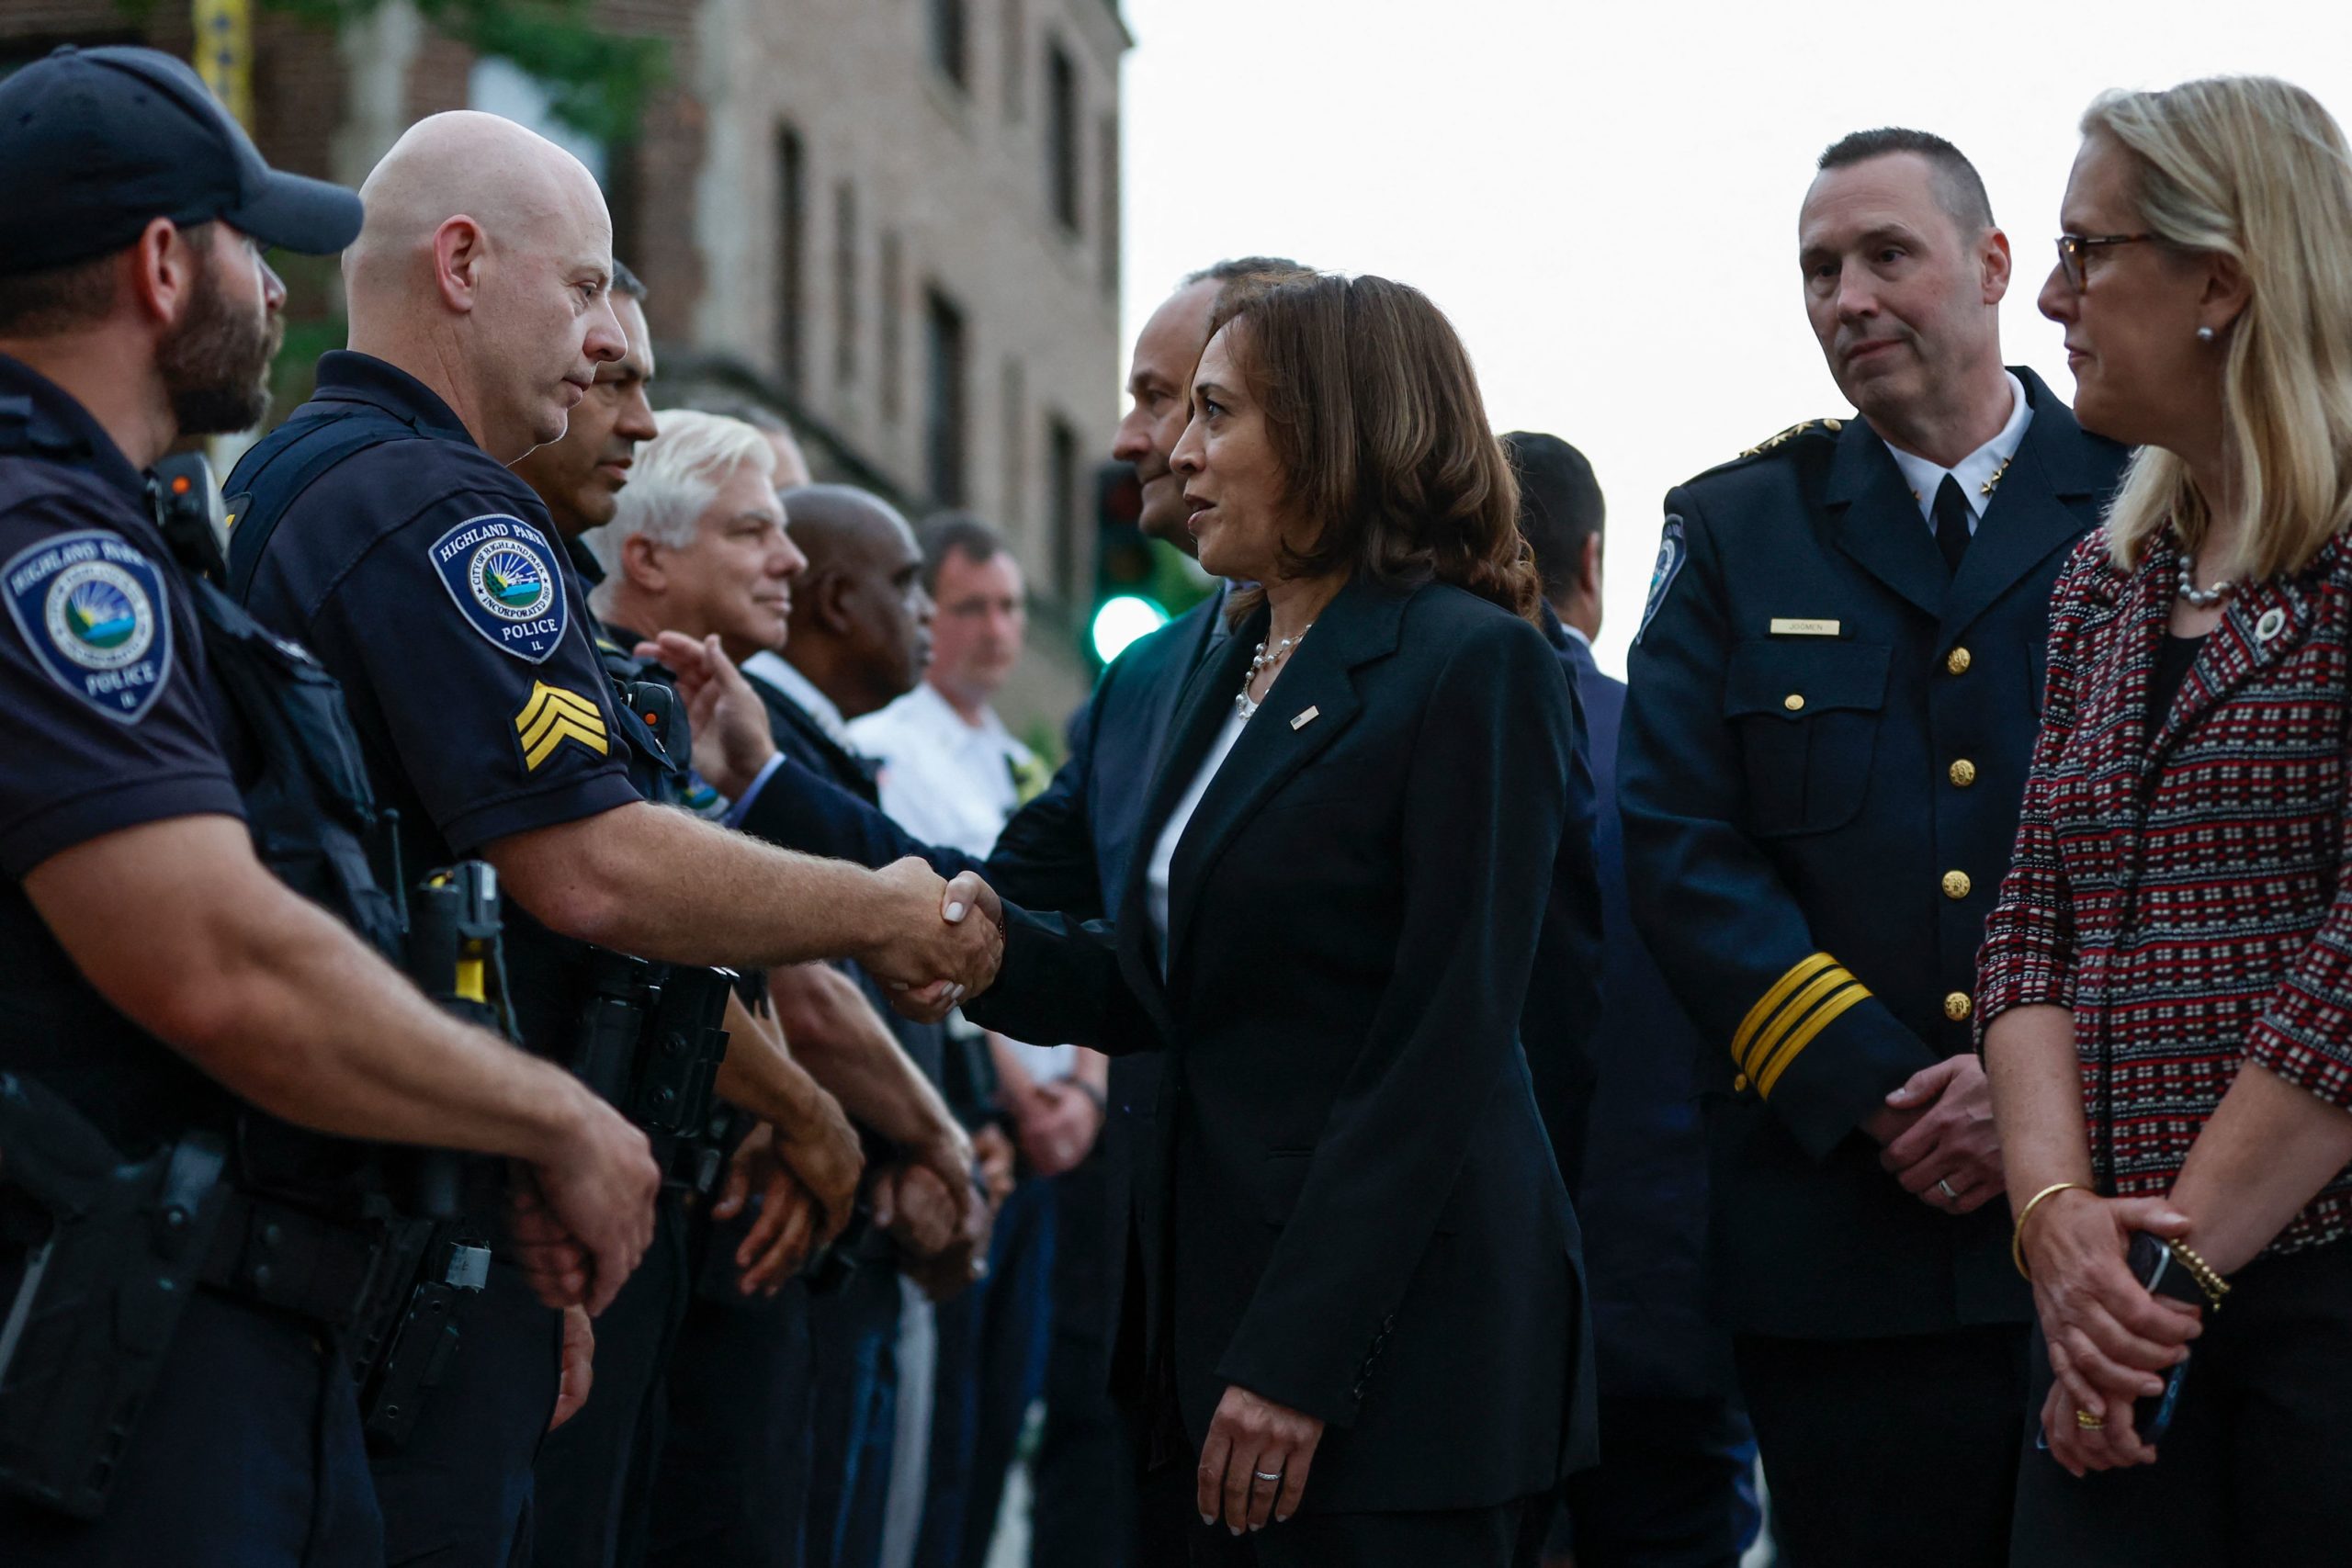 US Vice President Kamala Harris accompanied by Second Gentleman Doug Emhoff and Highland Park Mayor Nancy Rotering (R), talks with police officers during a surprise visit to the site of a shooting that left seven people dead in Highland Park, Illinois, on July 5, 2022. (Photo by KAMIL KRZACZYNSKI/AFP via Getty Images)